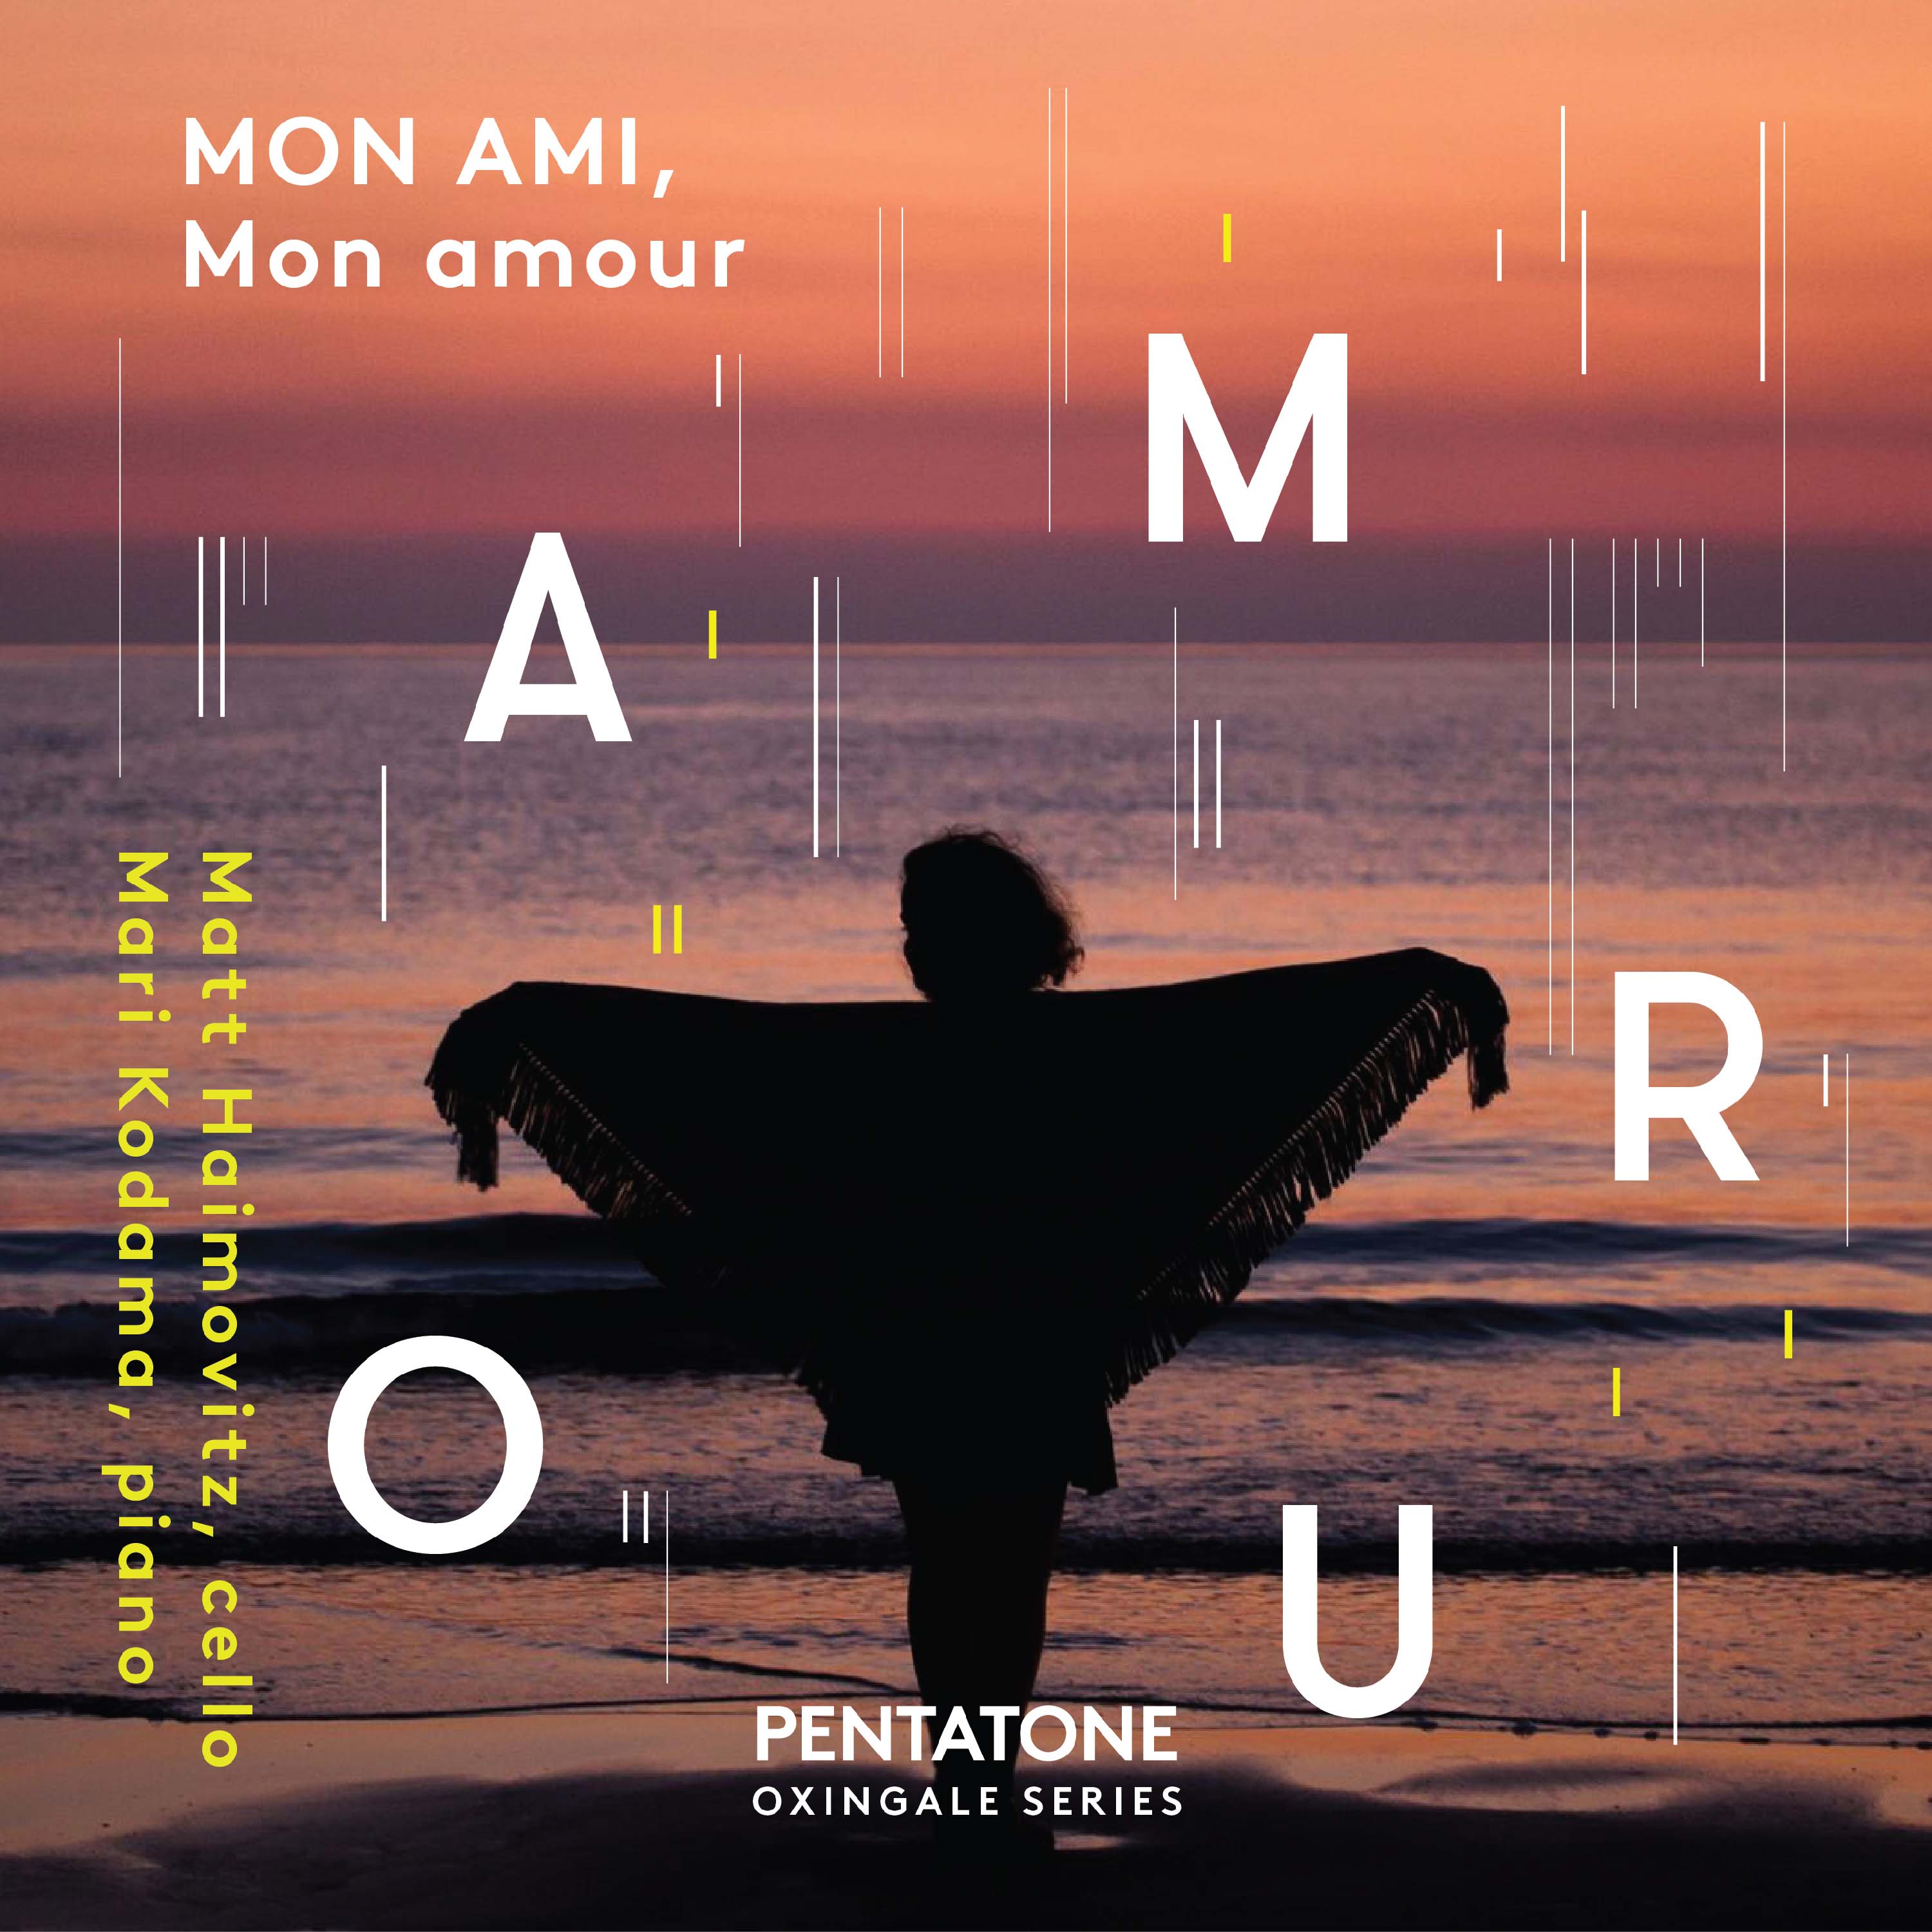 MON AMI, Mon amour makes CBC Music’s ‘Canada’s best classical
albums of the year’